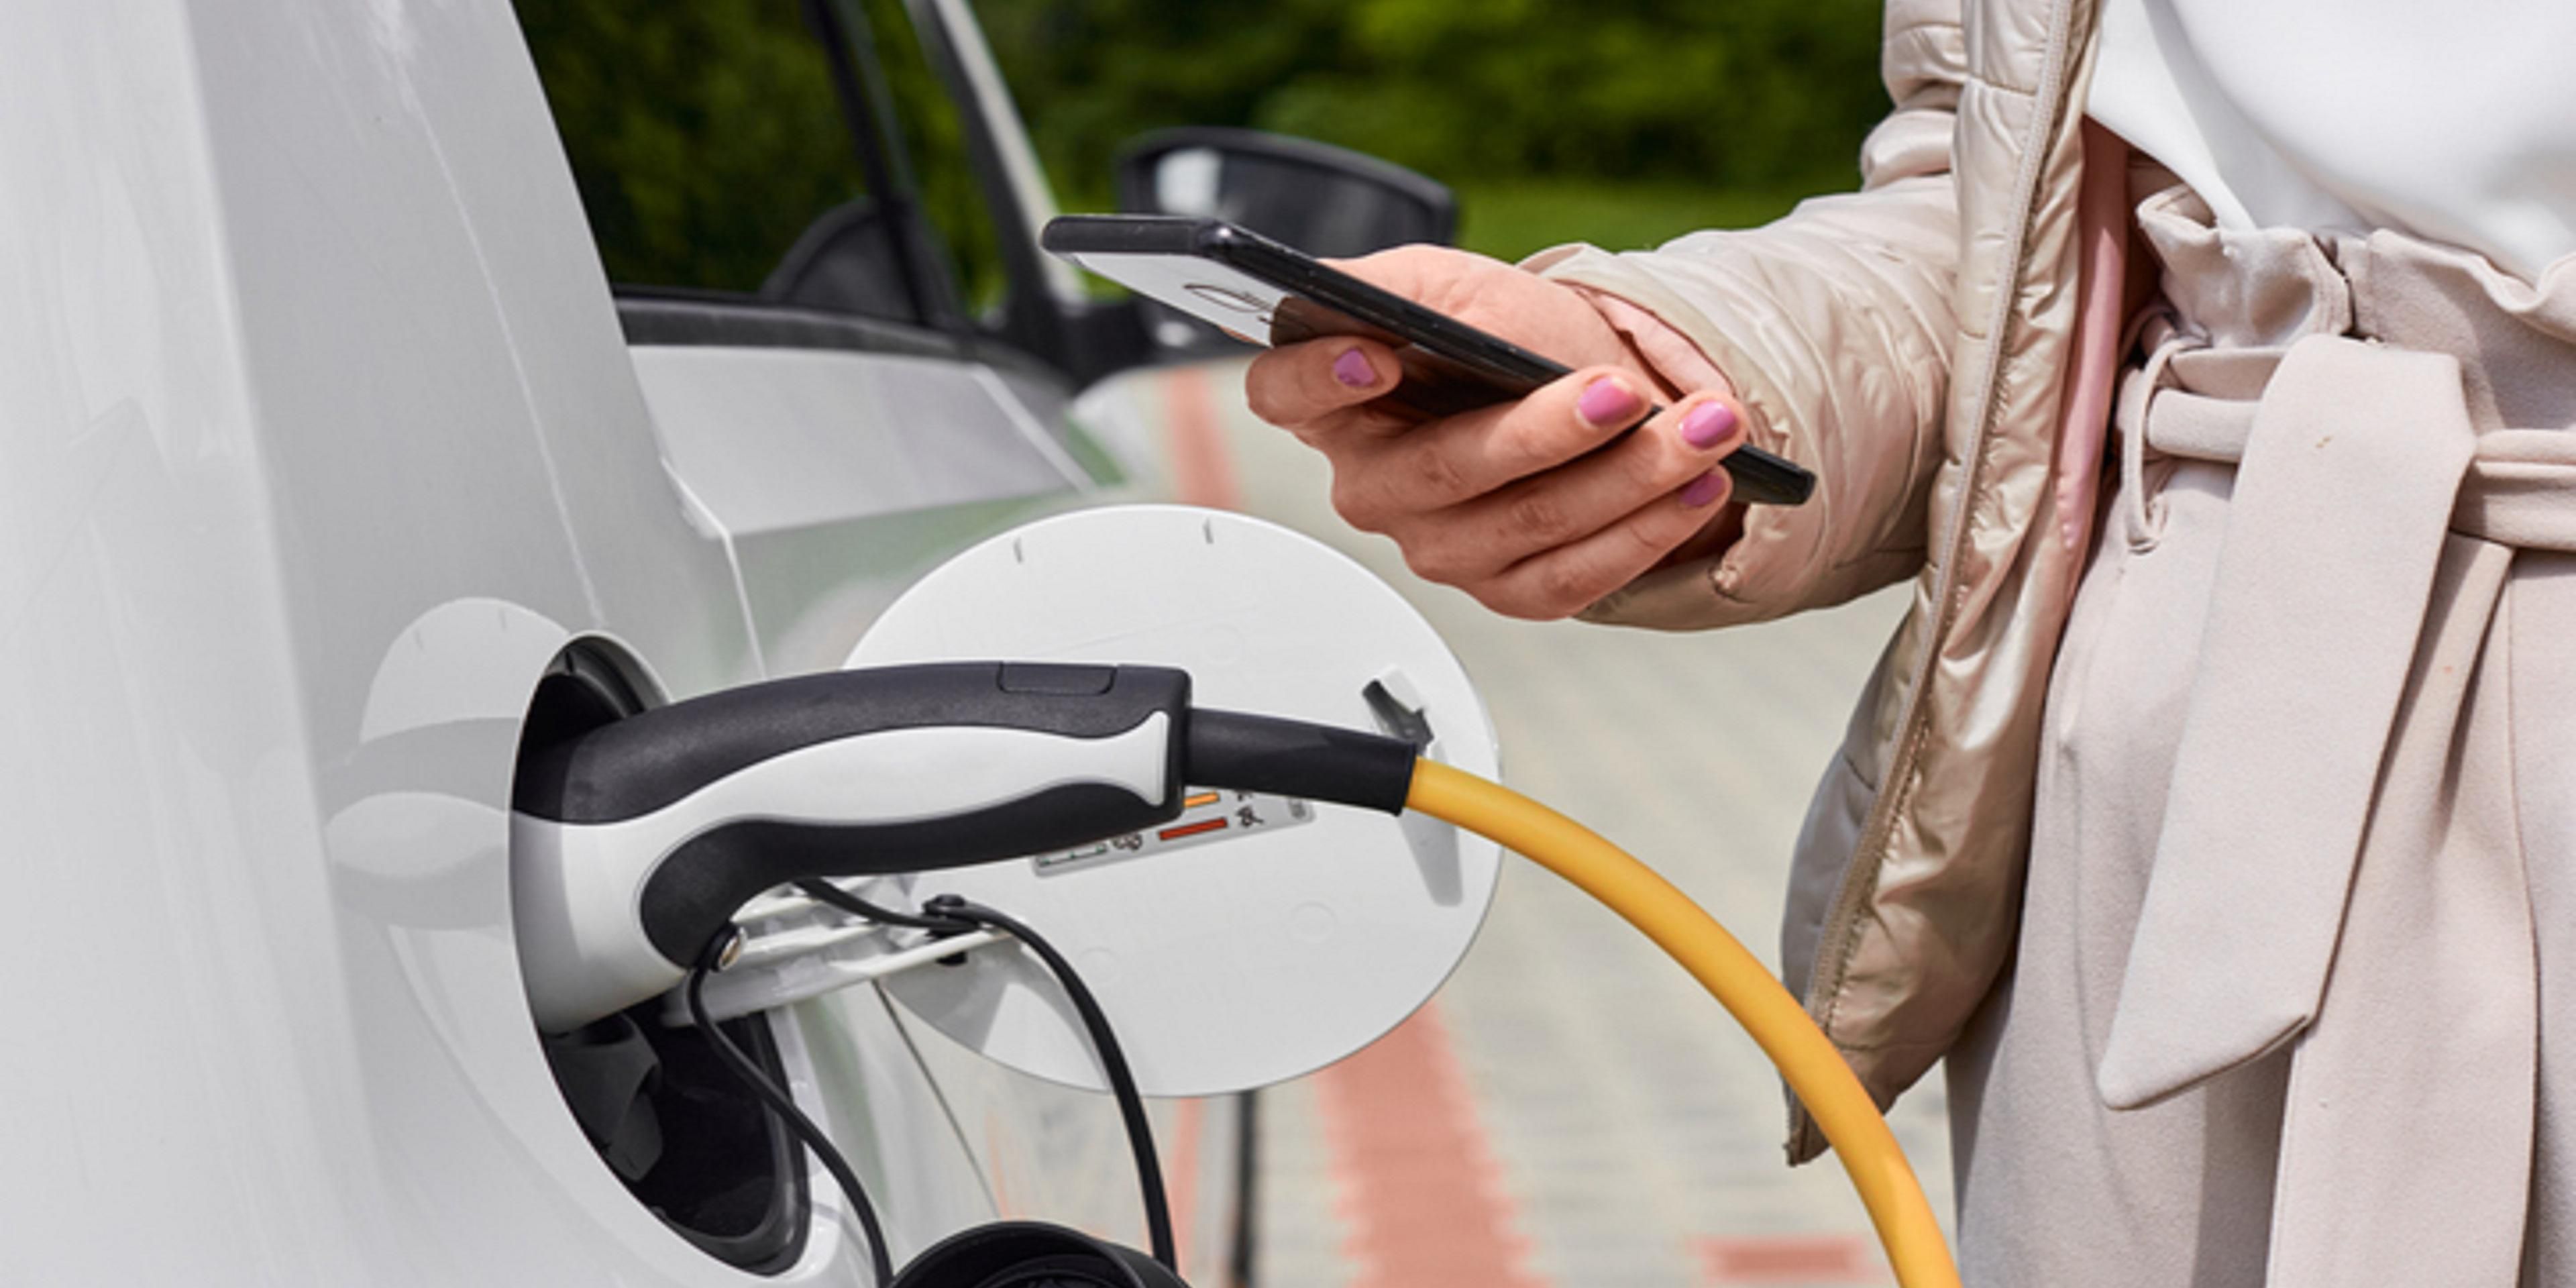 If you drive an electric vehicle, visit one of our convenient electronic charging stations during your stay. Charge is complimentary.